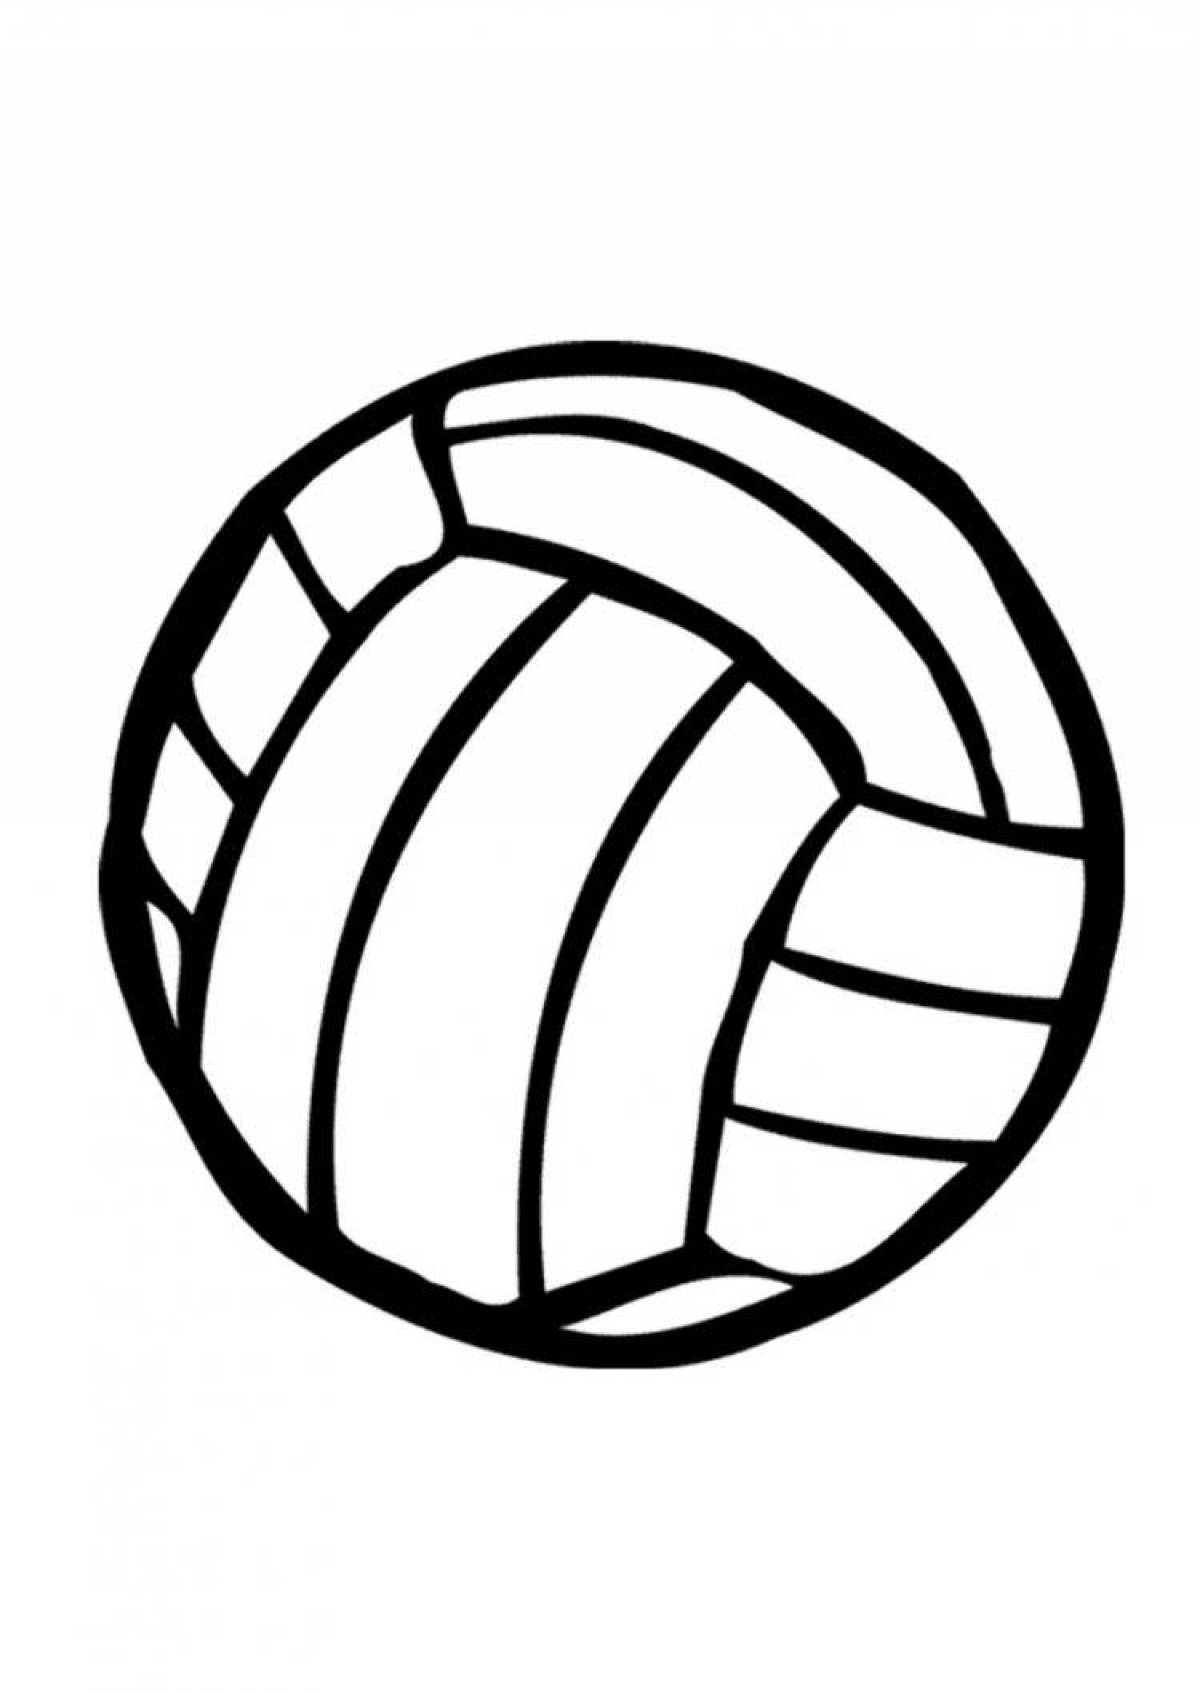 Fascinating volleyball coloring book